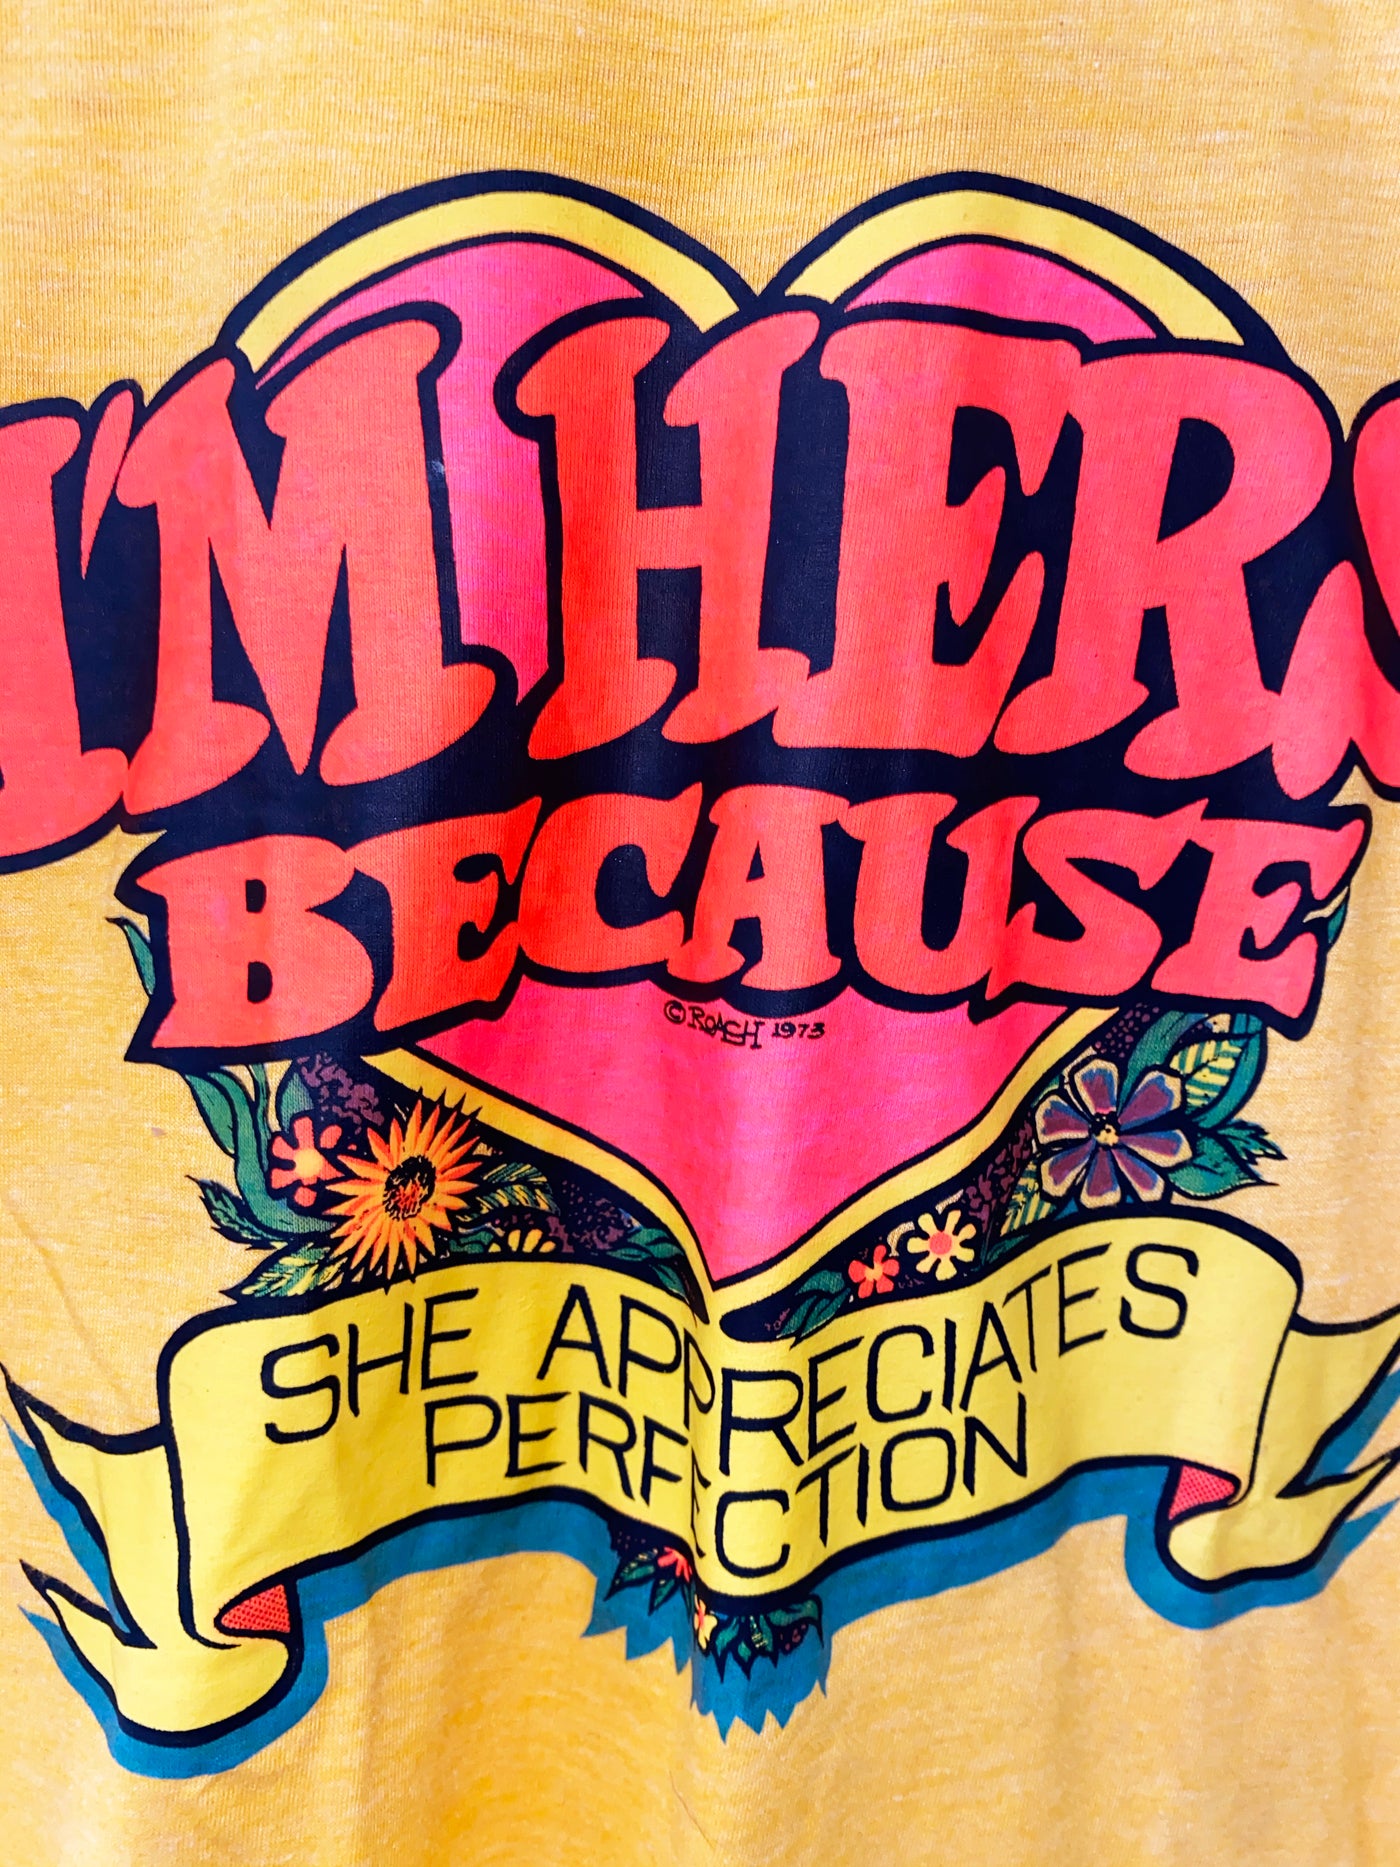 Vintage 1973 “I’m Hers because She Appreciates Perfection” T-Shirt